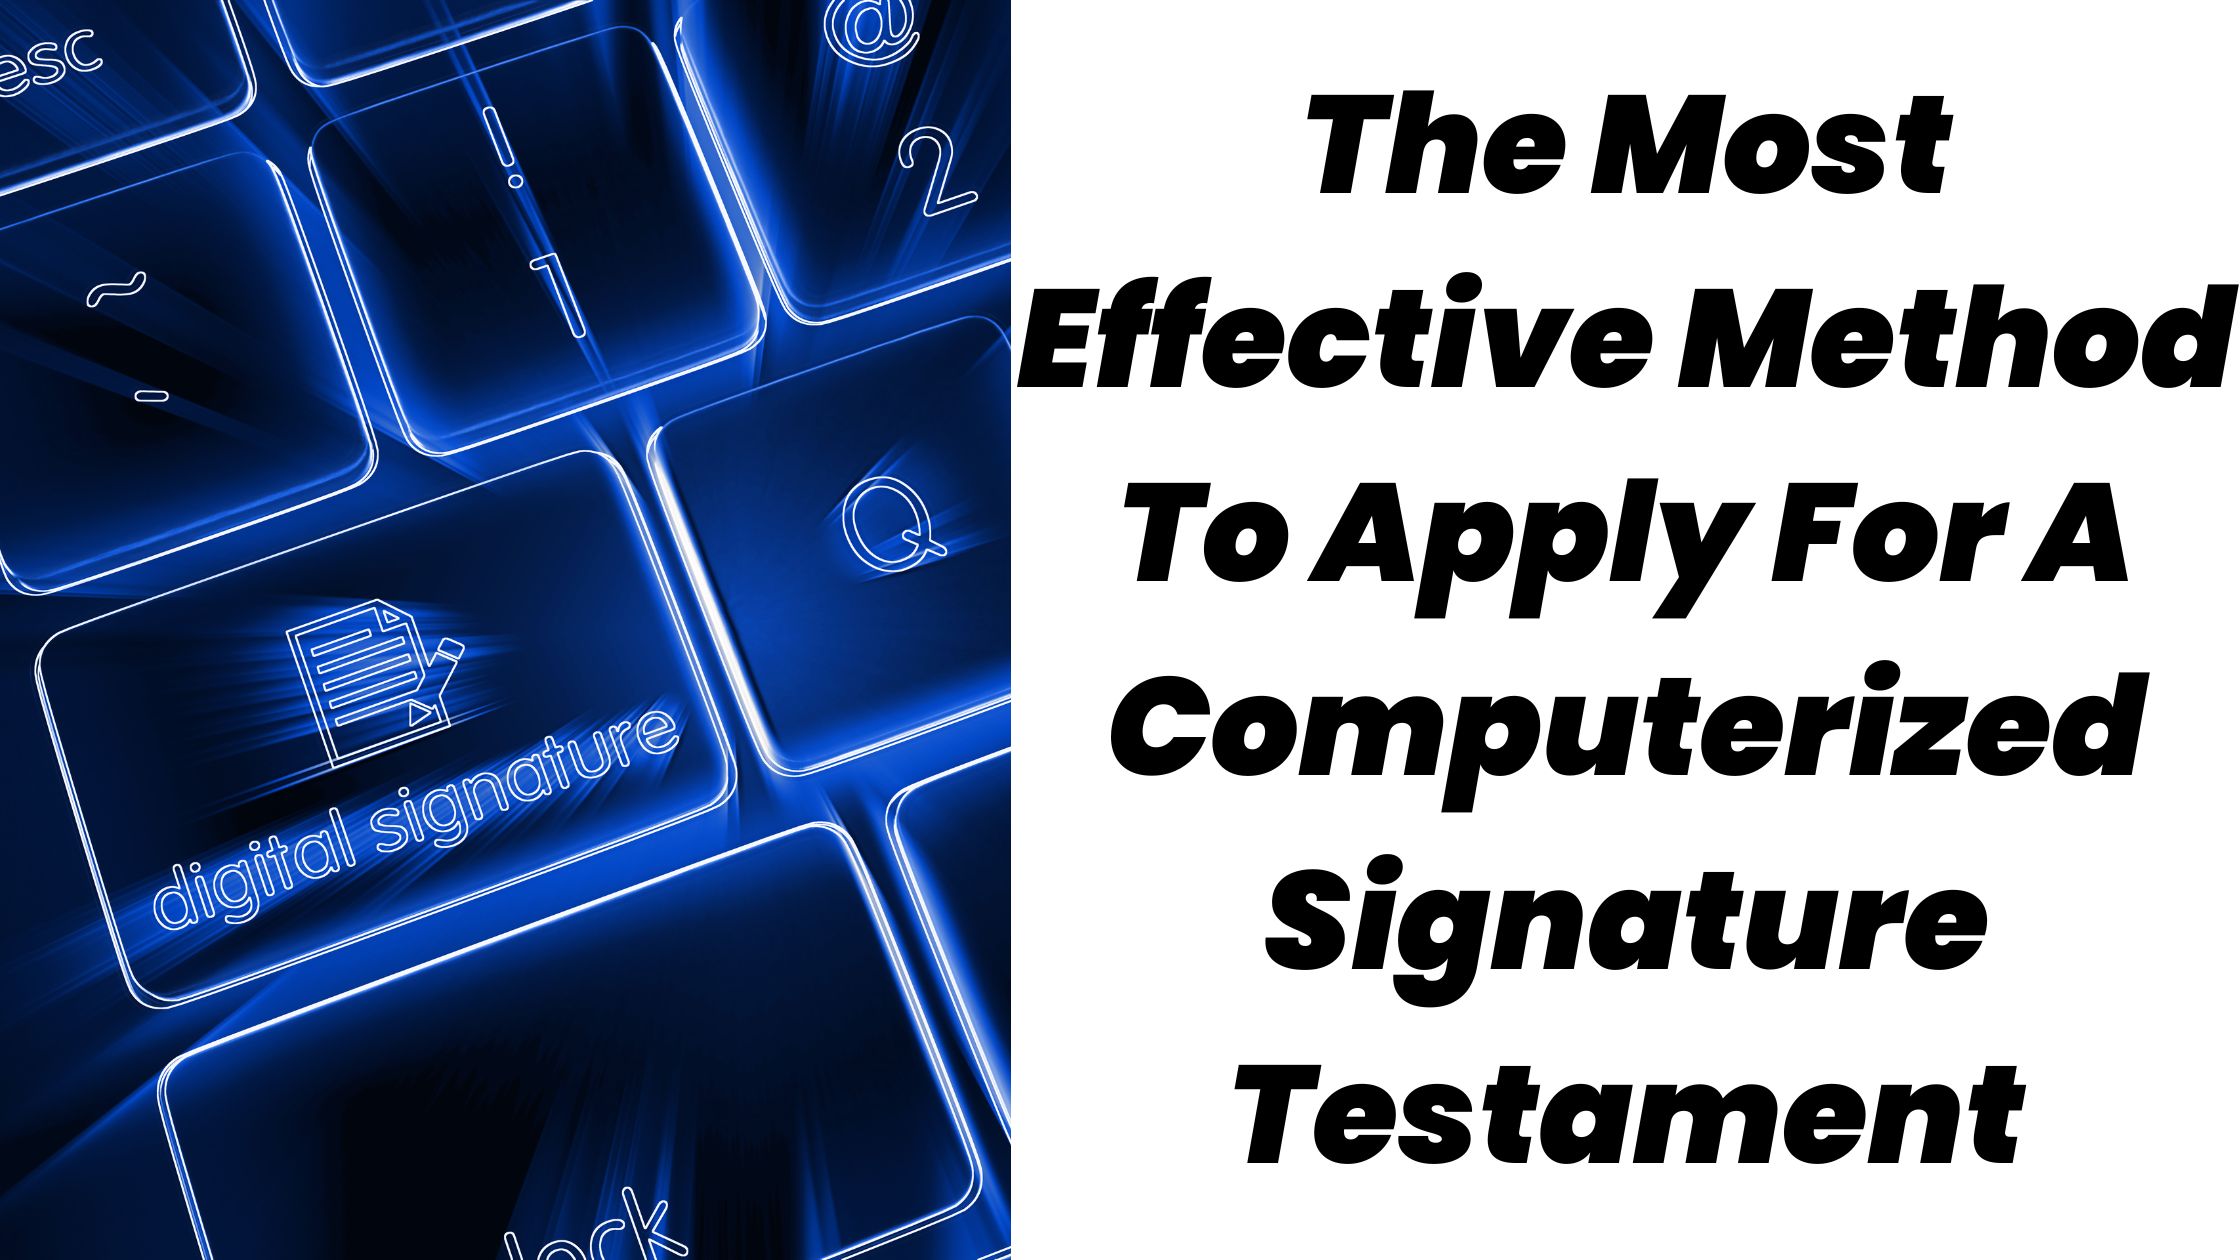 The Most Effective Method To Apply For A Computerized Signature Testament